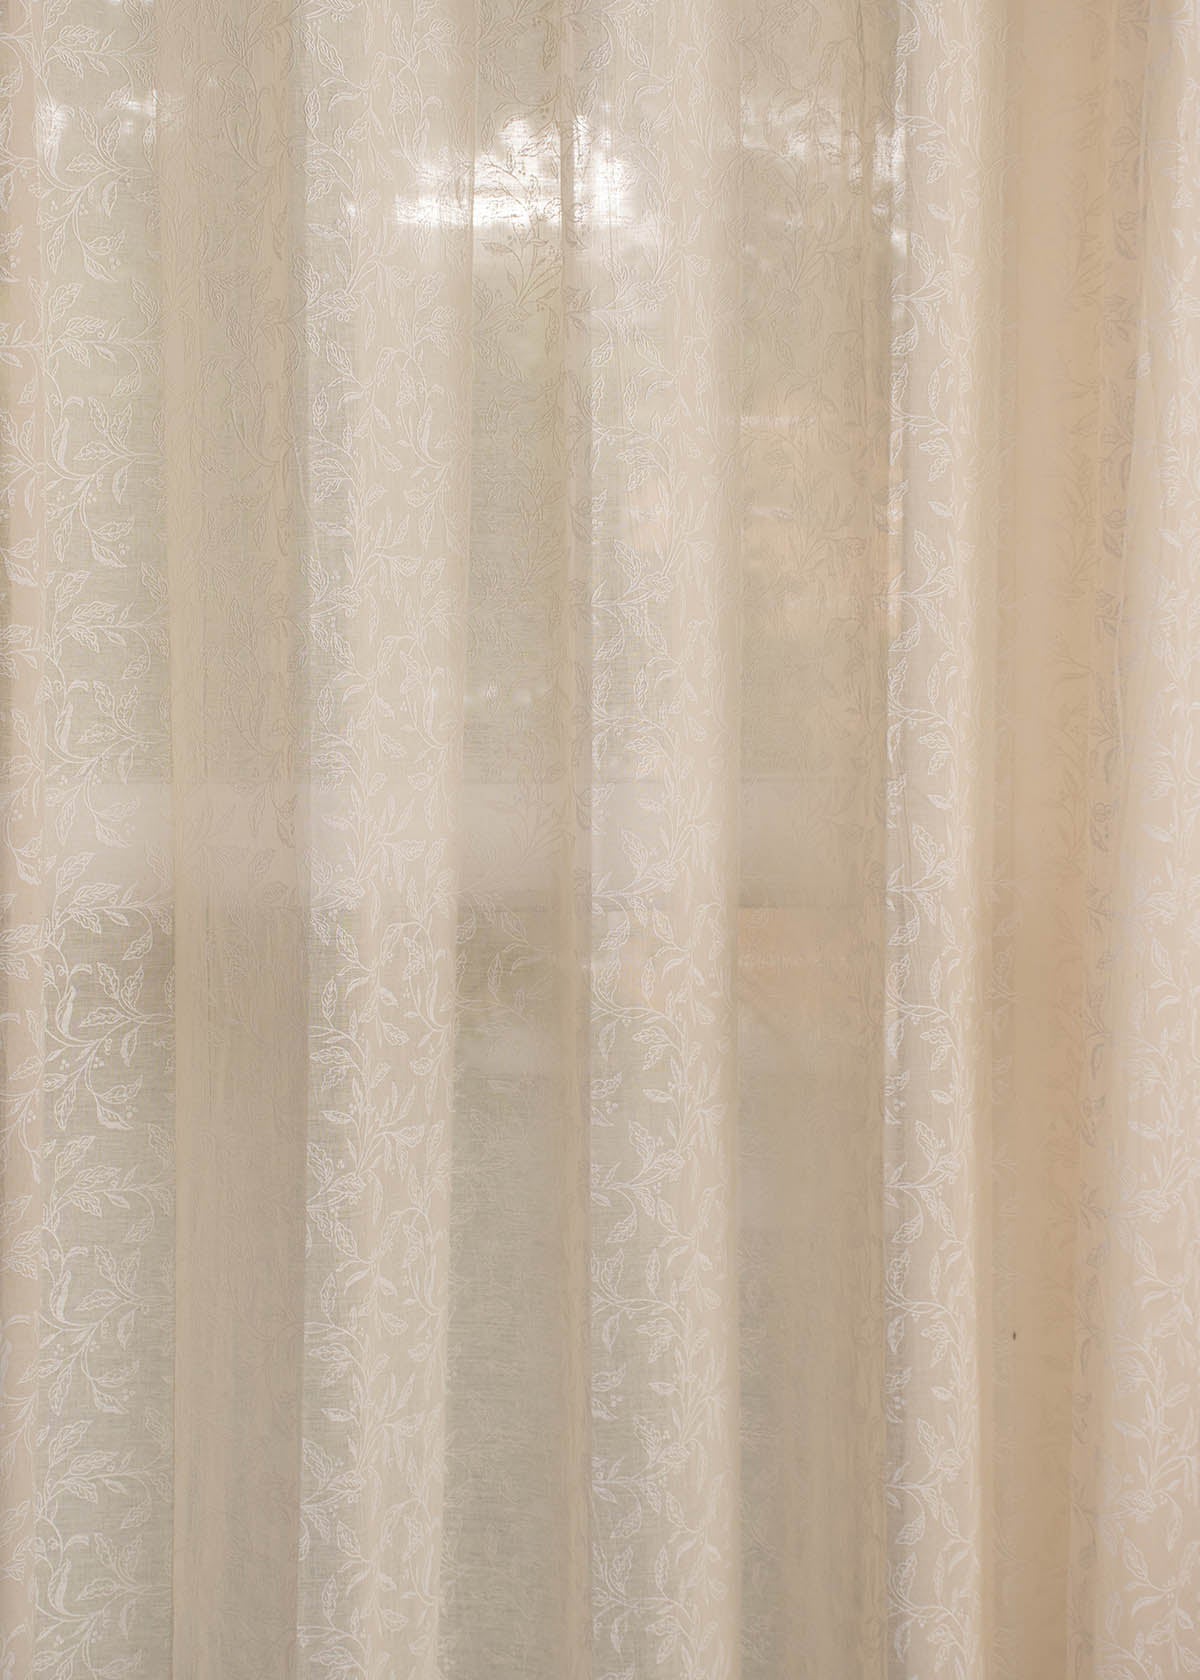 Trailing Berries 100% Customizable Cotton Sheer minimal curtain for Living room - Light filtering - Cream